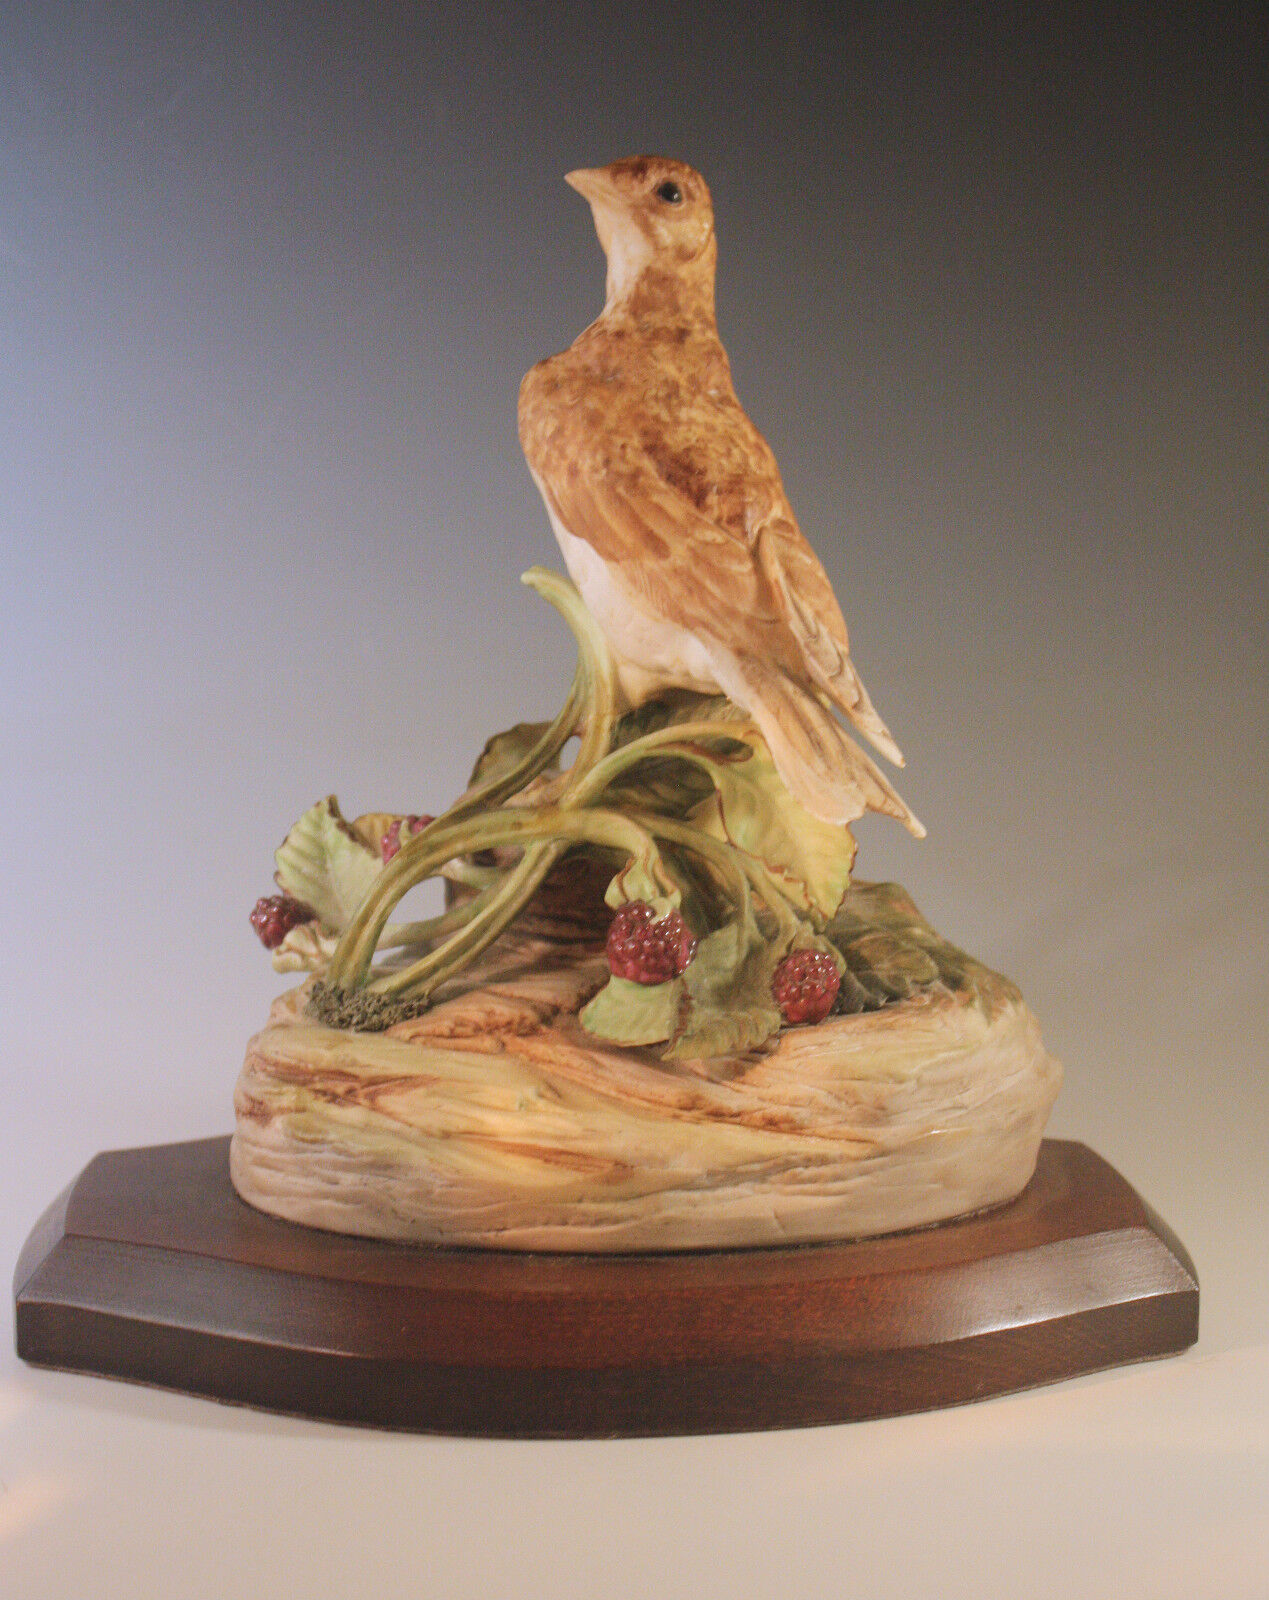 VINTAGE CYBIS LIMITED EDITION SKYLARK MALE SCULPTURE WOODEN STAND MINT SIGNED